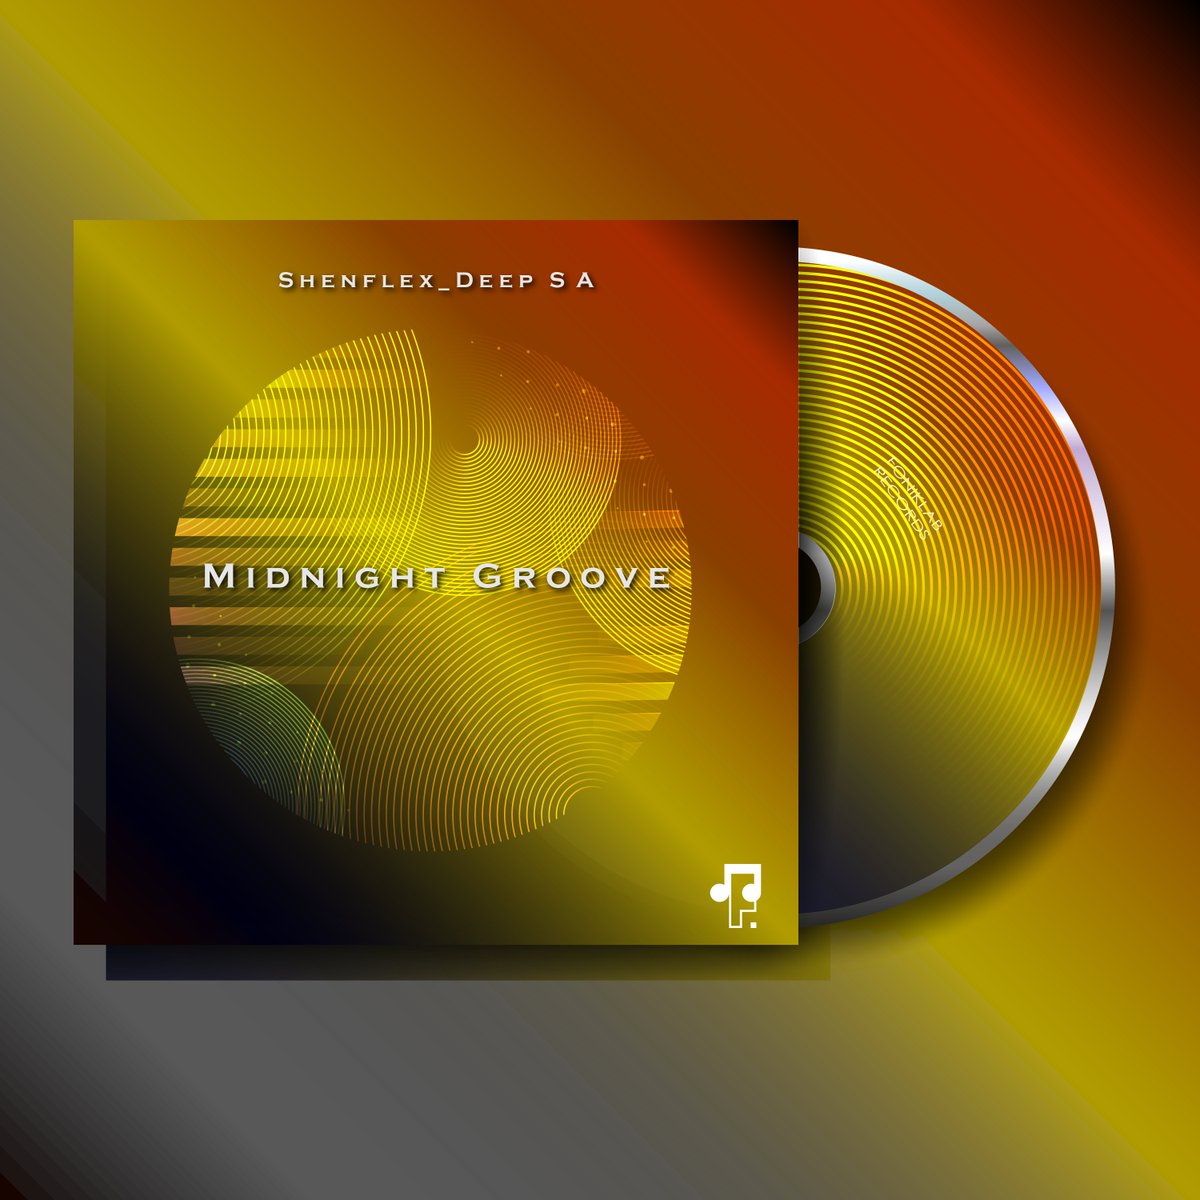 Shenflex_Deep SA - Midnight Groove EP Out Now 🔗 Download/Stream: bit.ly/3PZLHv6 Enter the nocturnal realm of deep house with Midnight Groove, the mesmerizing EP by Shenflex Deep SA . #FonikLabRecords #DeepHouse #HouseMusic #SoulfulHouse #DeepTech #NostalgicMusic